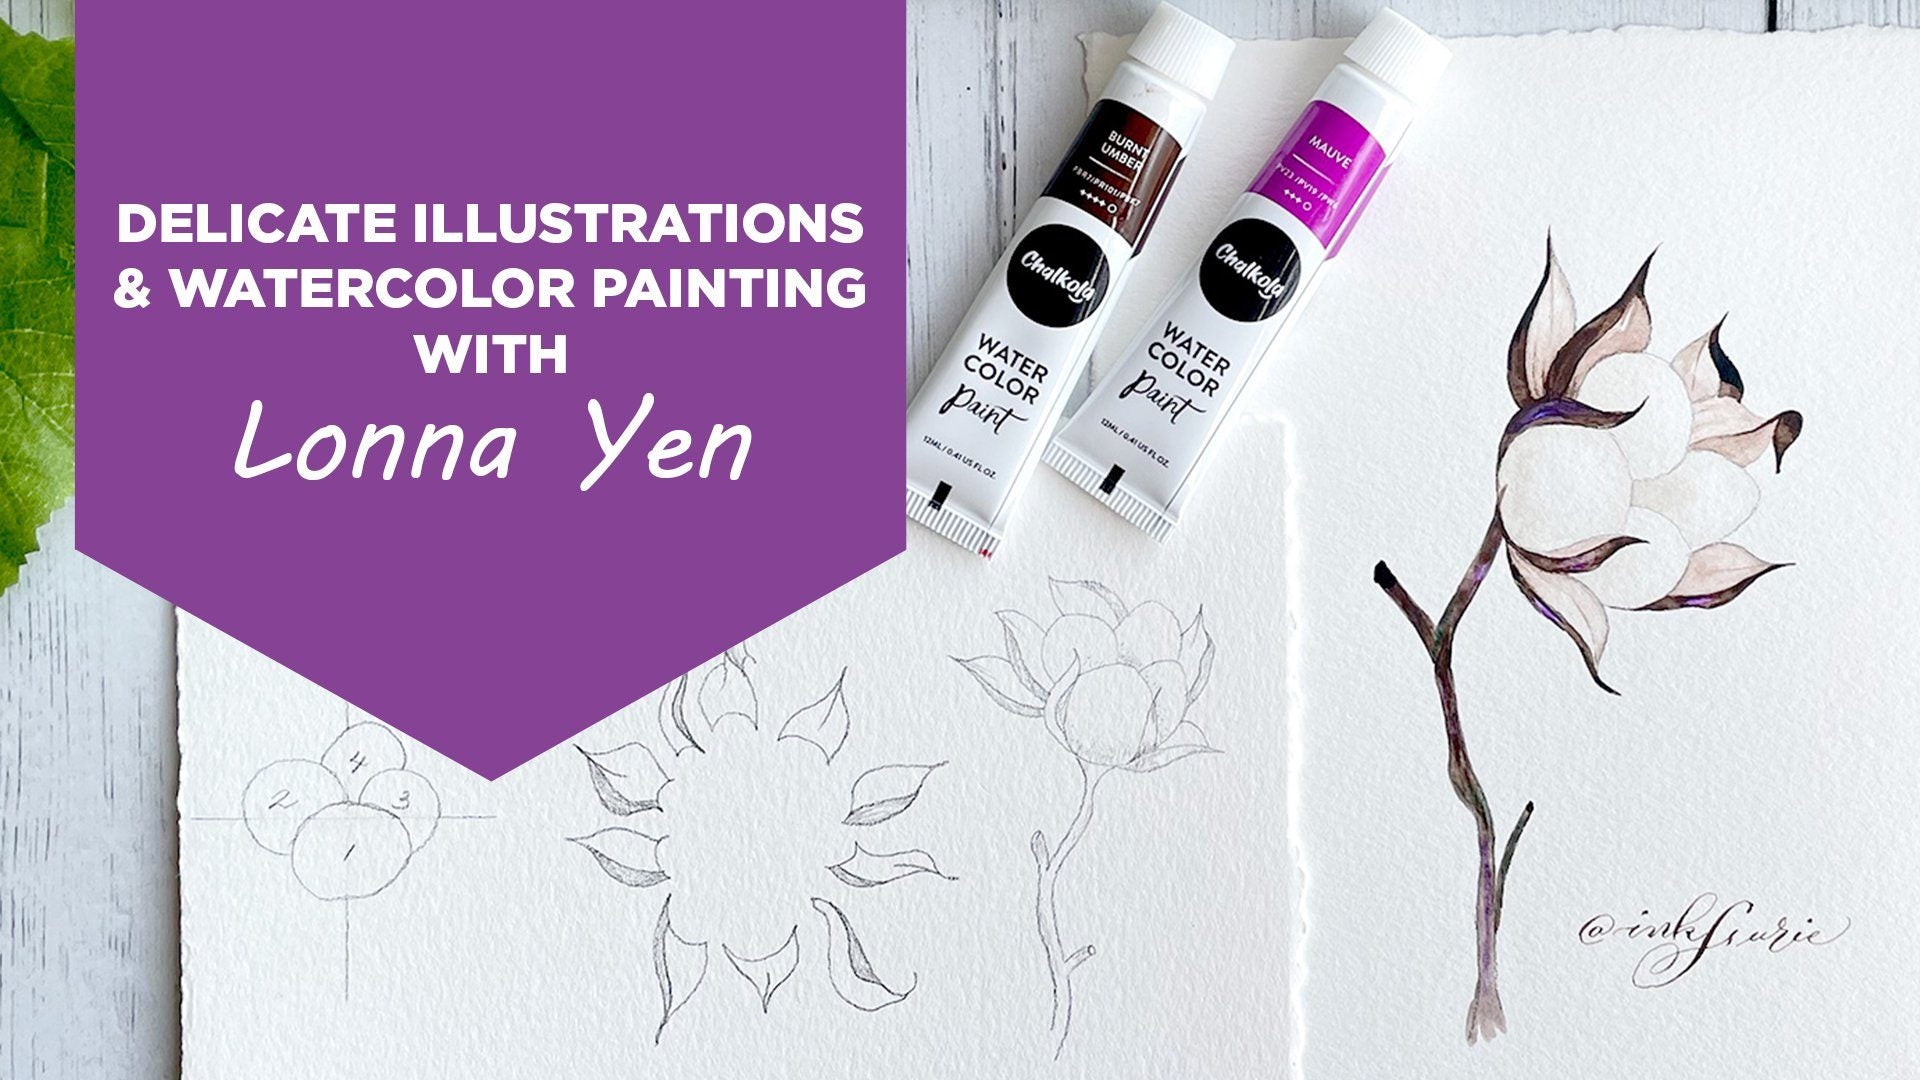 Delicate Illustrations and Watercolor Painting with Lonna Yen